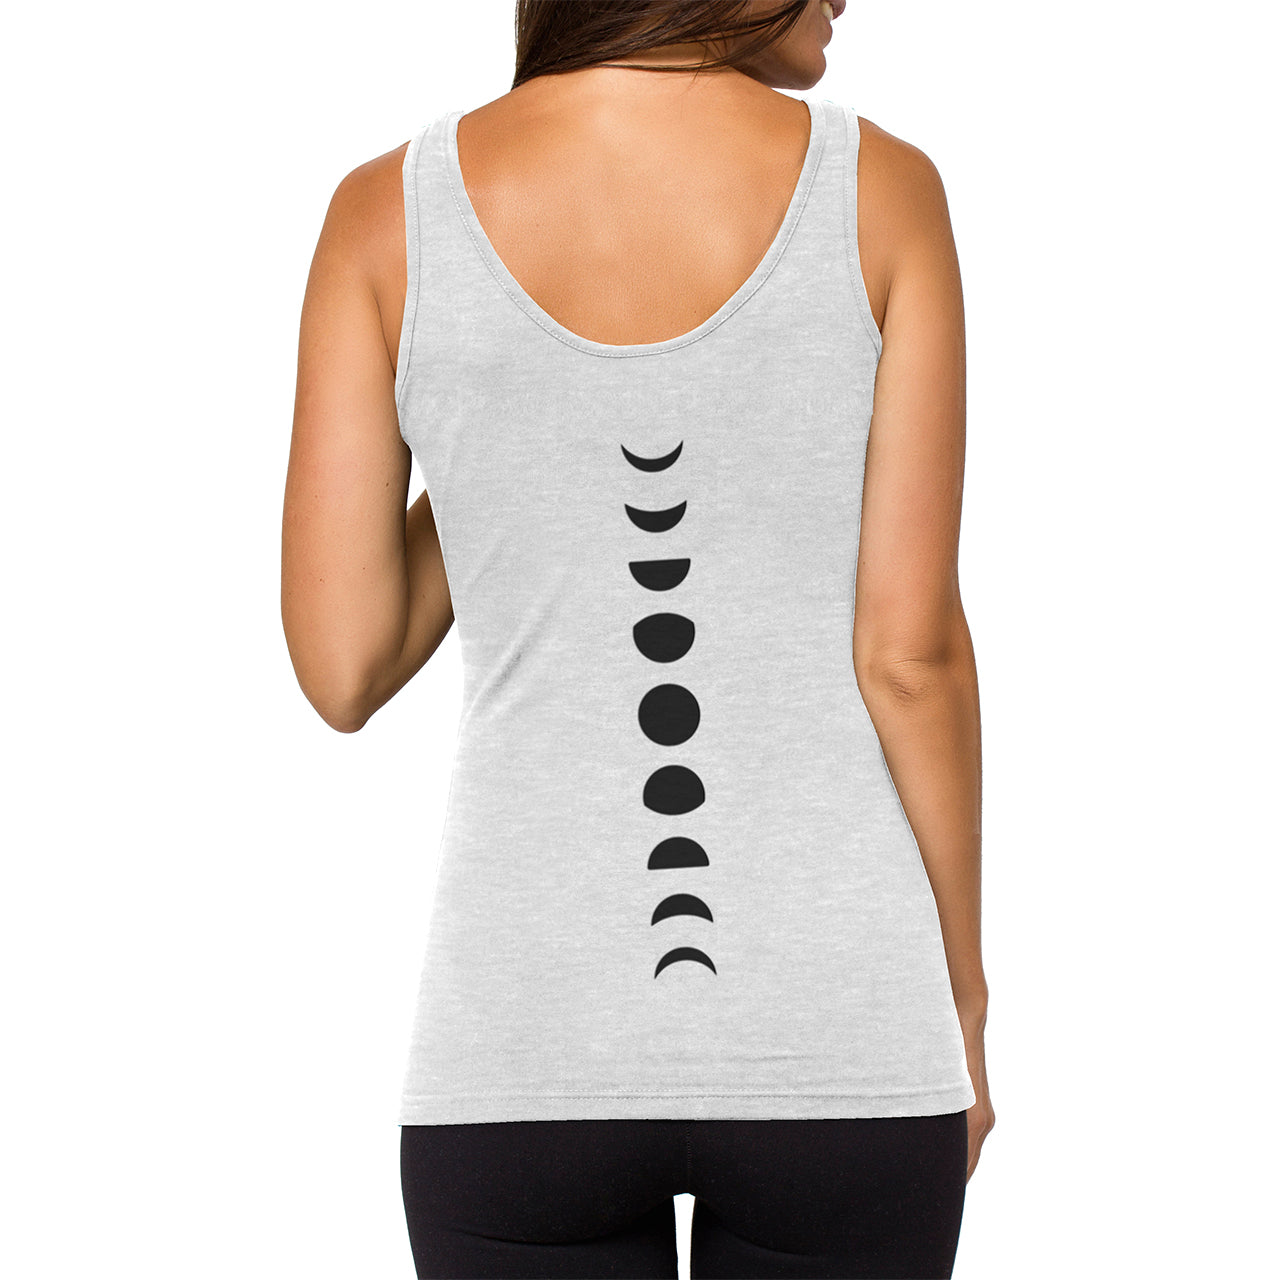 Yoga Tank Tops for Women Organic Cotton T-Shirts Best for Yoga